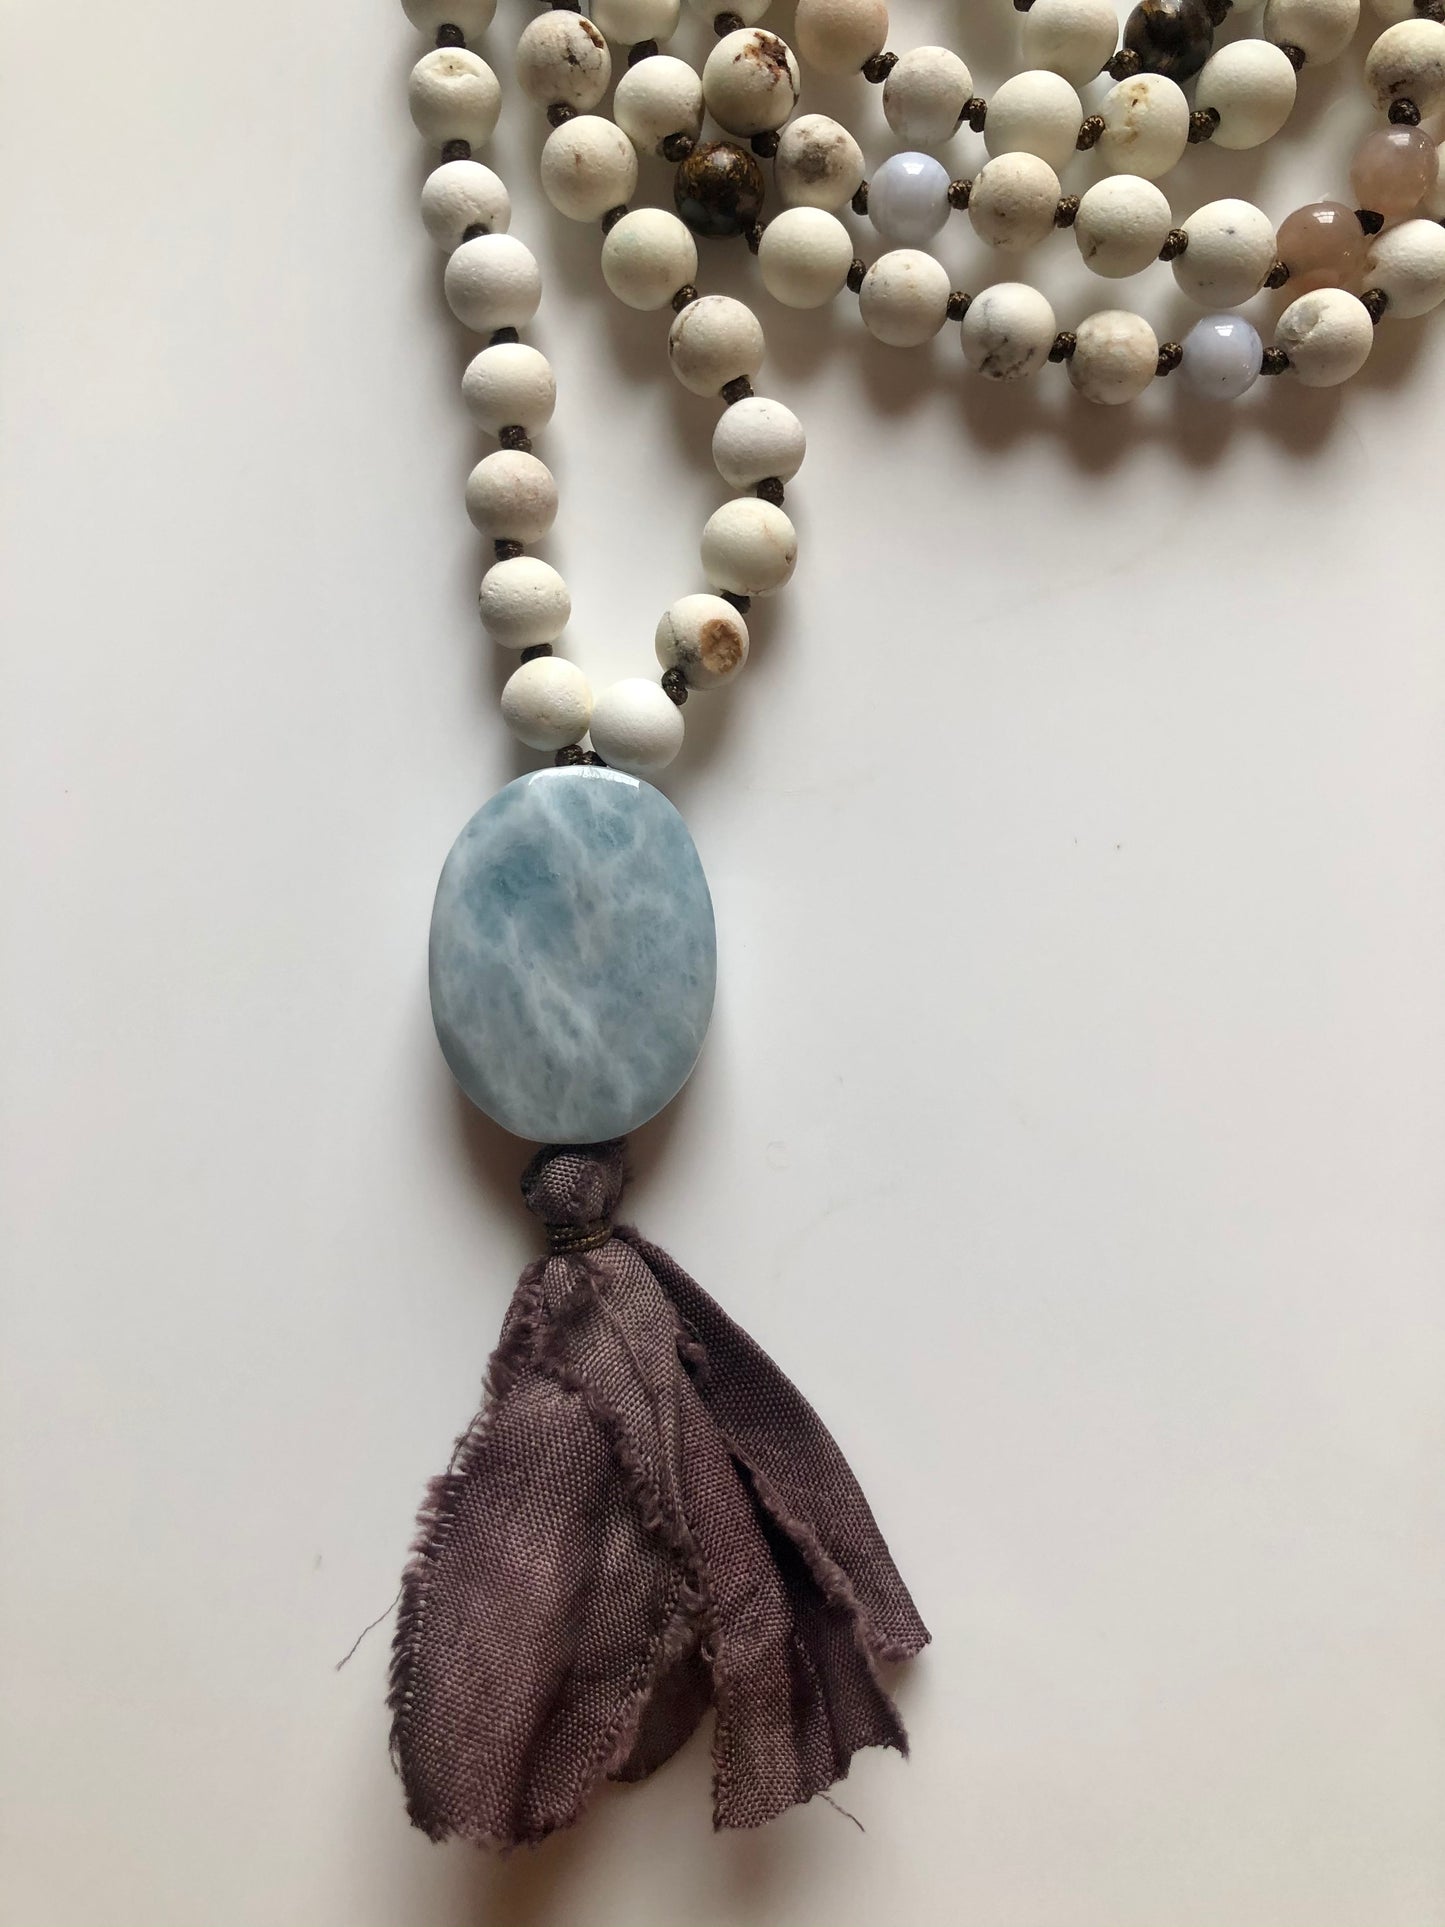 The Love- Filled Mala